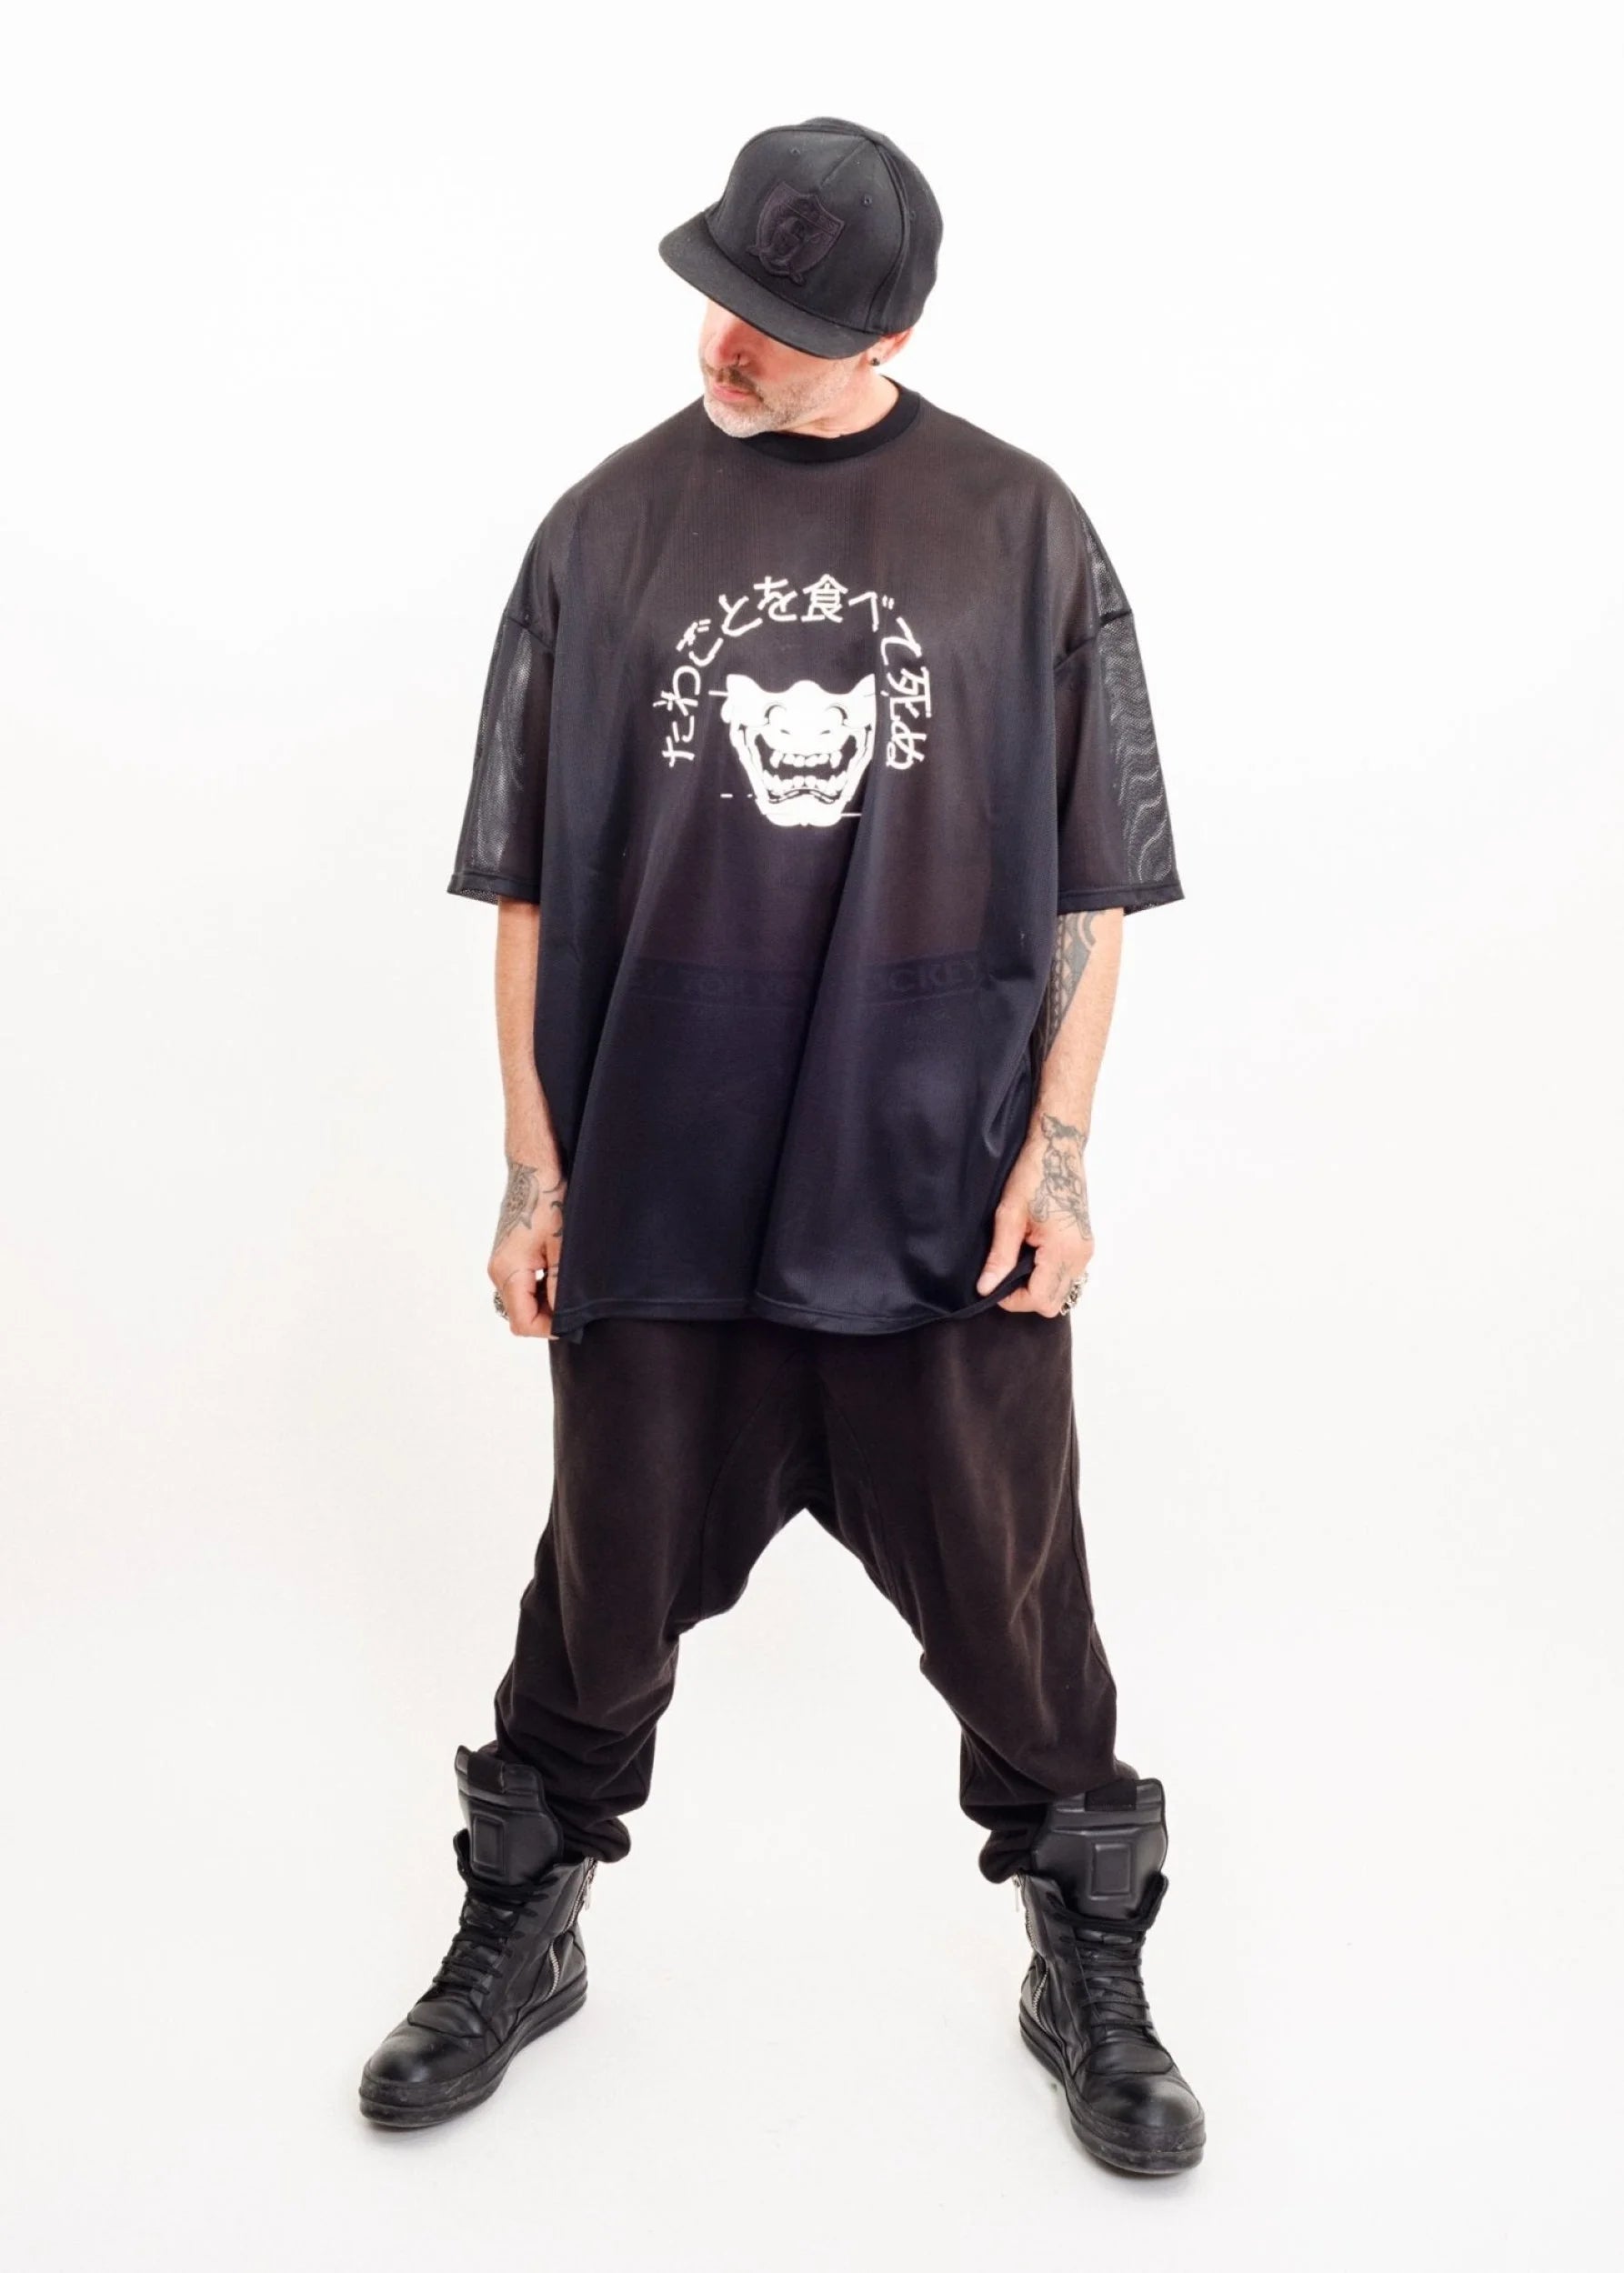 Clark Dean “Eat Shit and Die” oversized mesh t - shirt